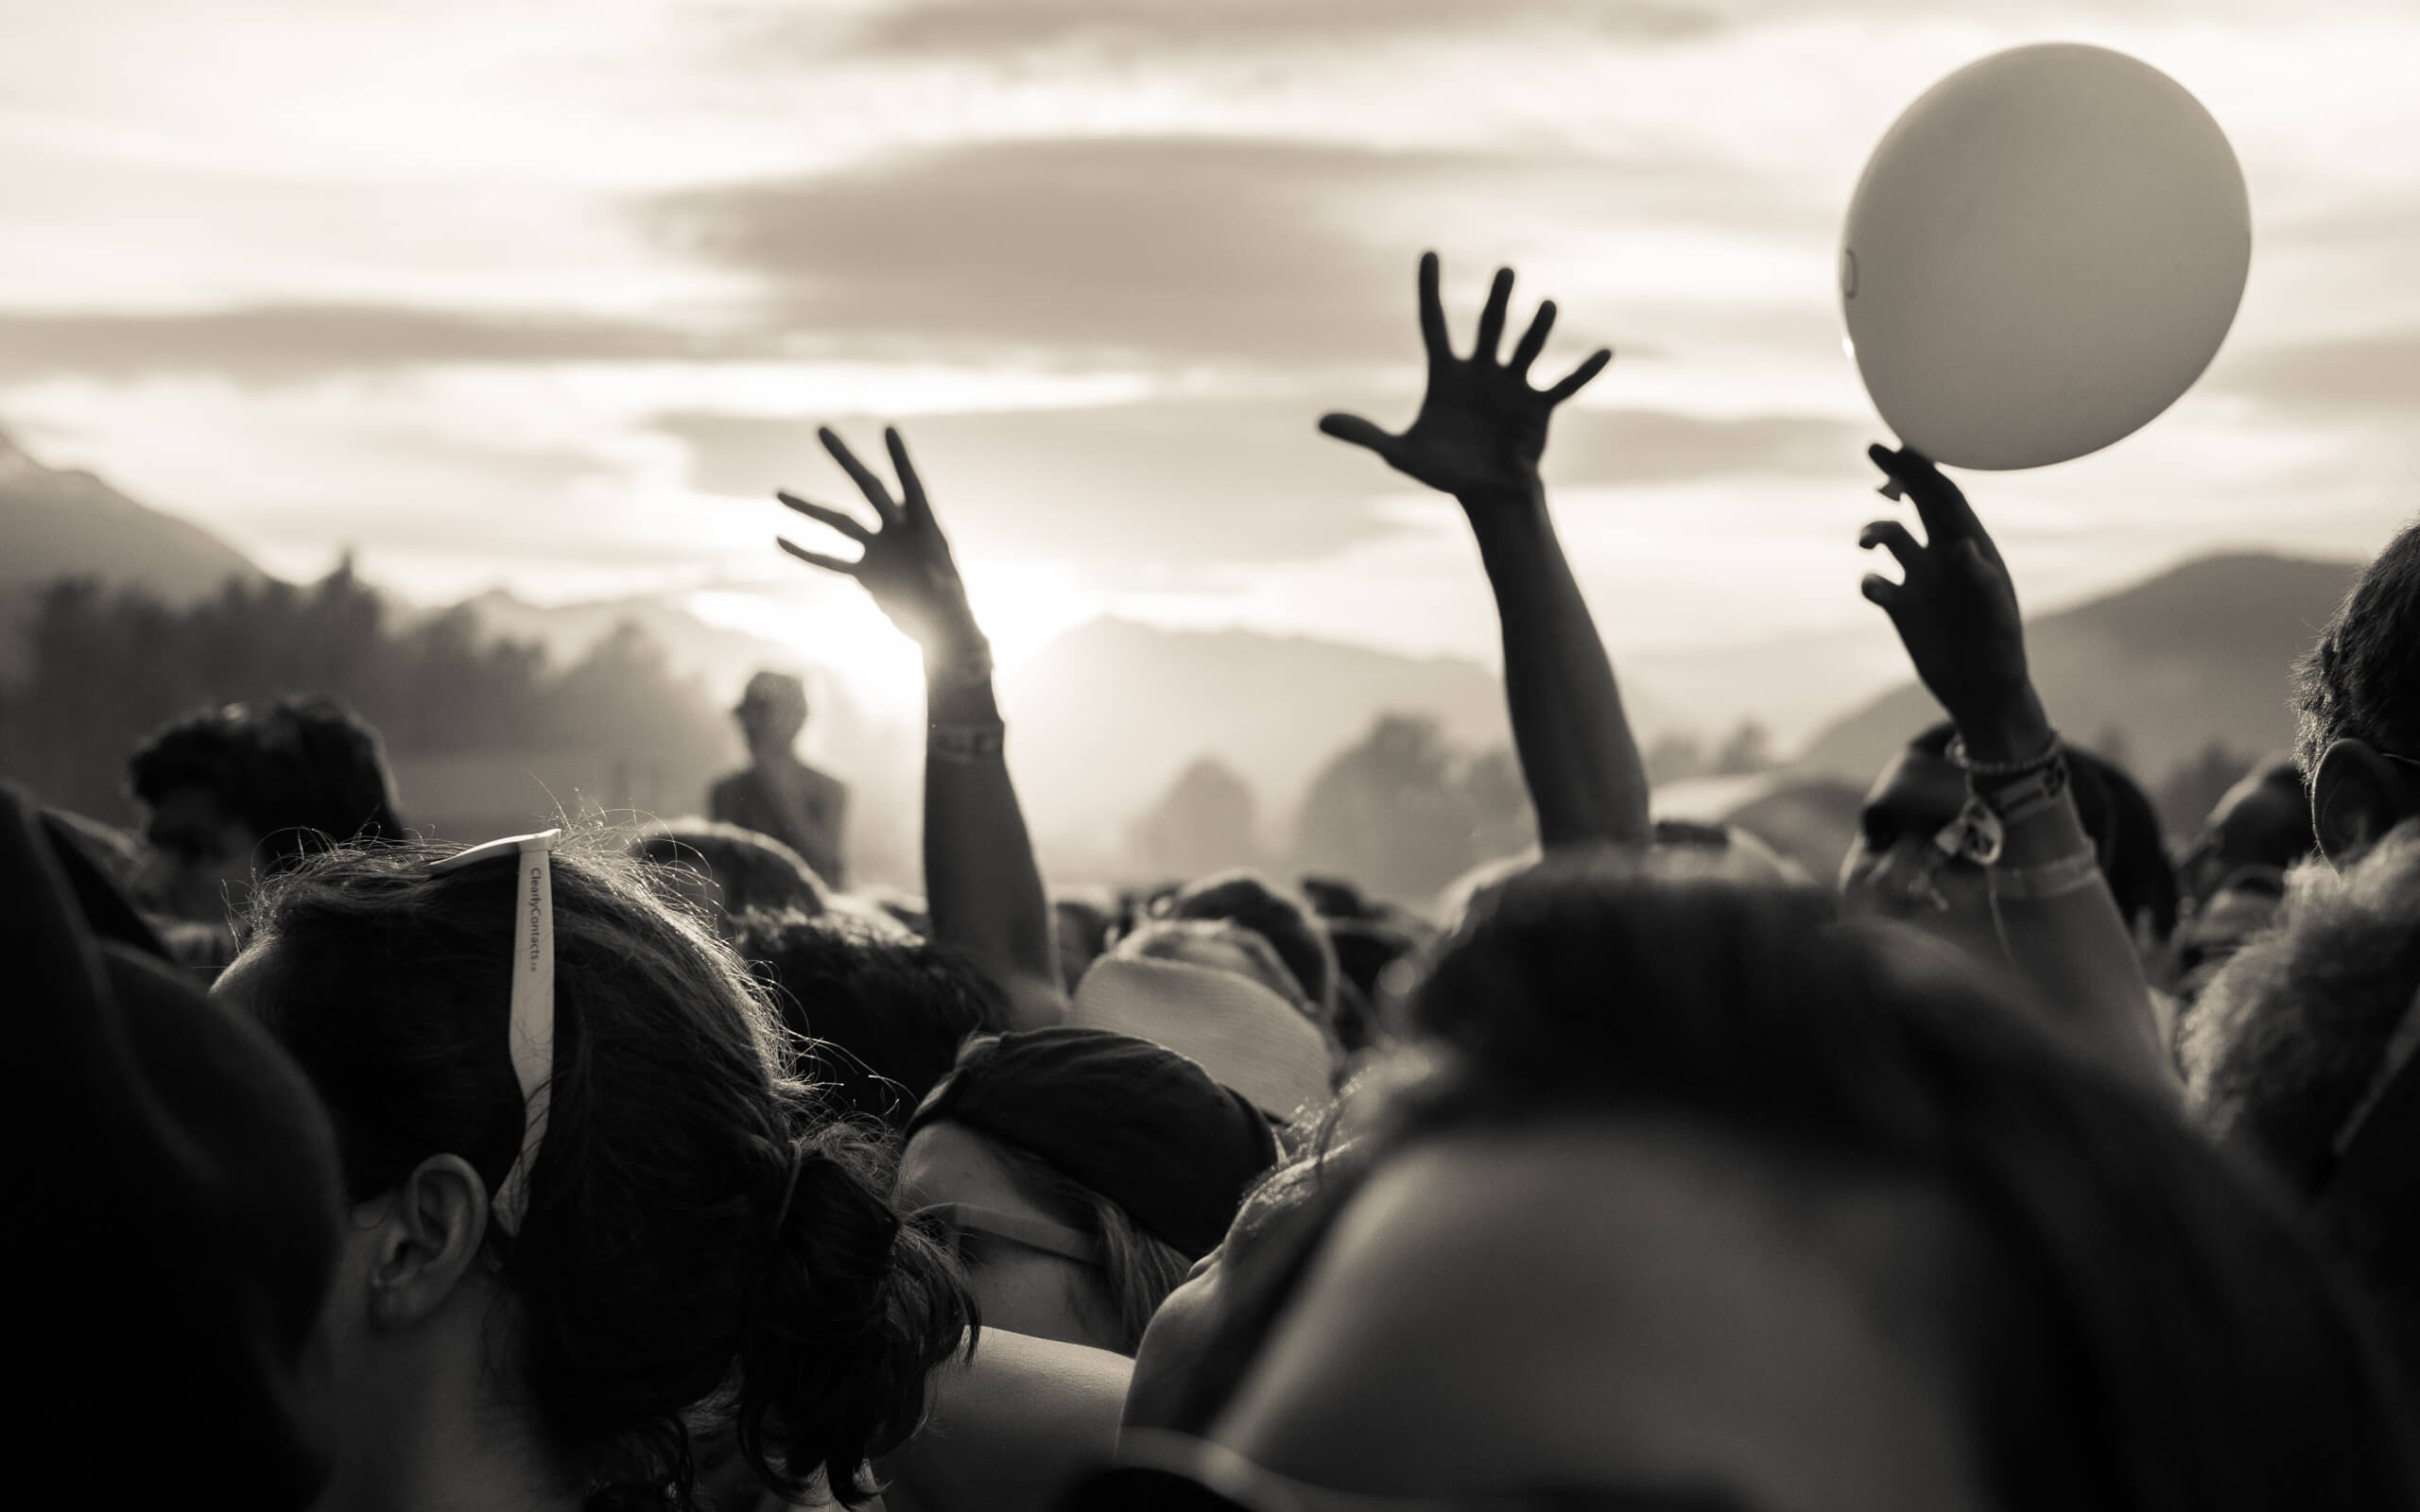 Music Images. Concert photography image of two hands raised seeking energy at a music festival.